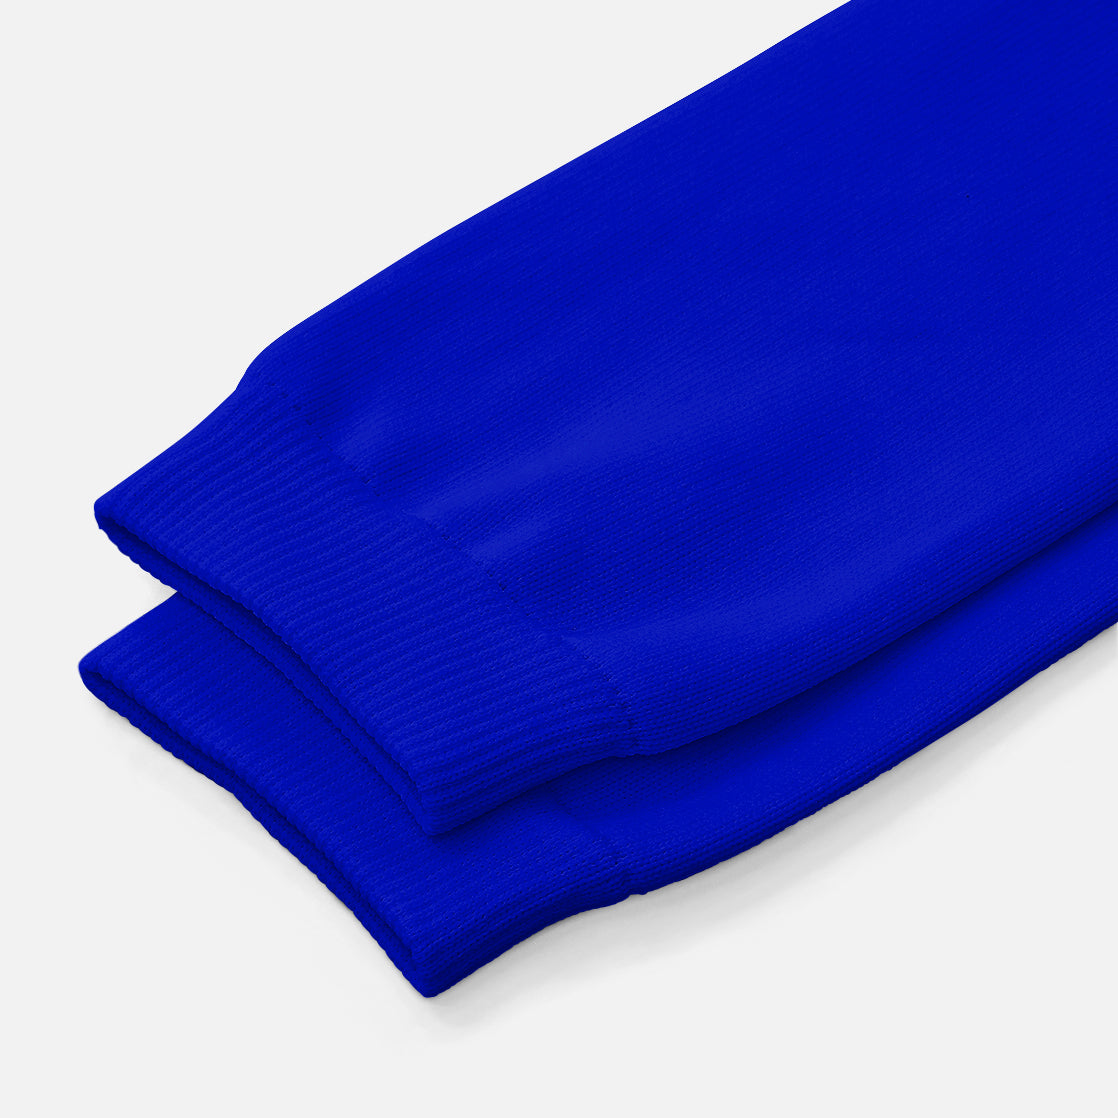 Hue Royal Blue Knitted Compression Calf Sleeves